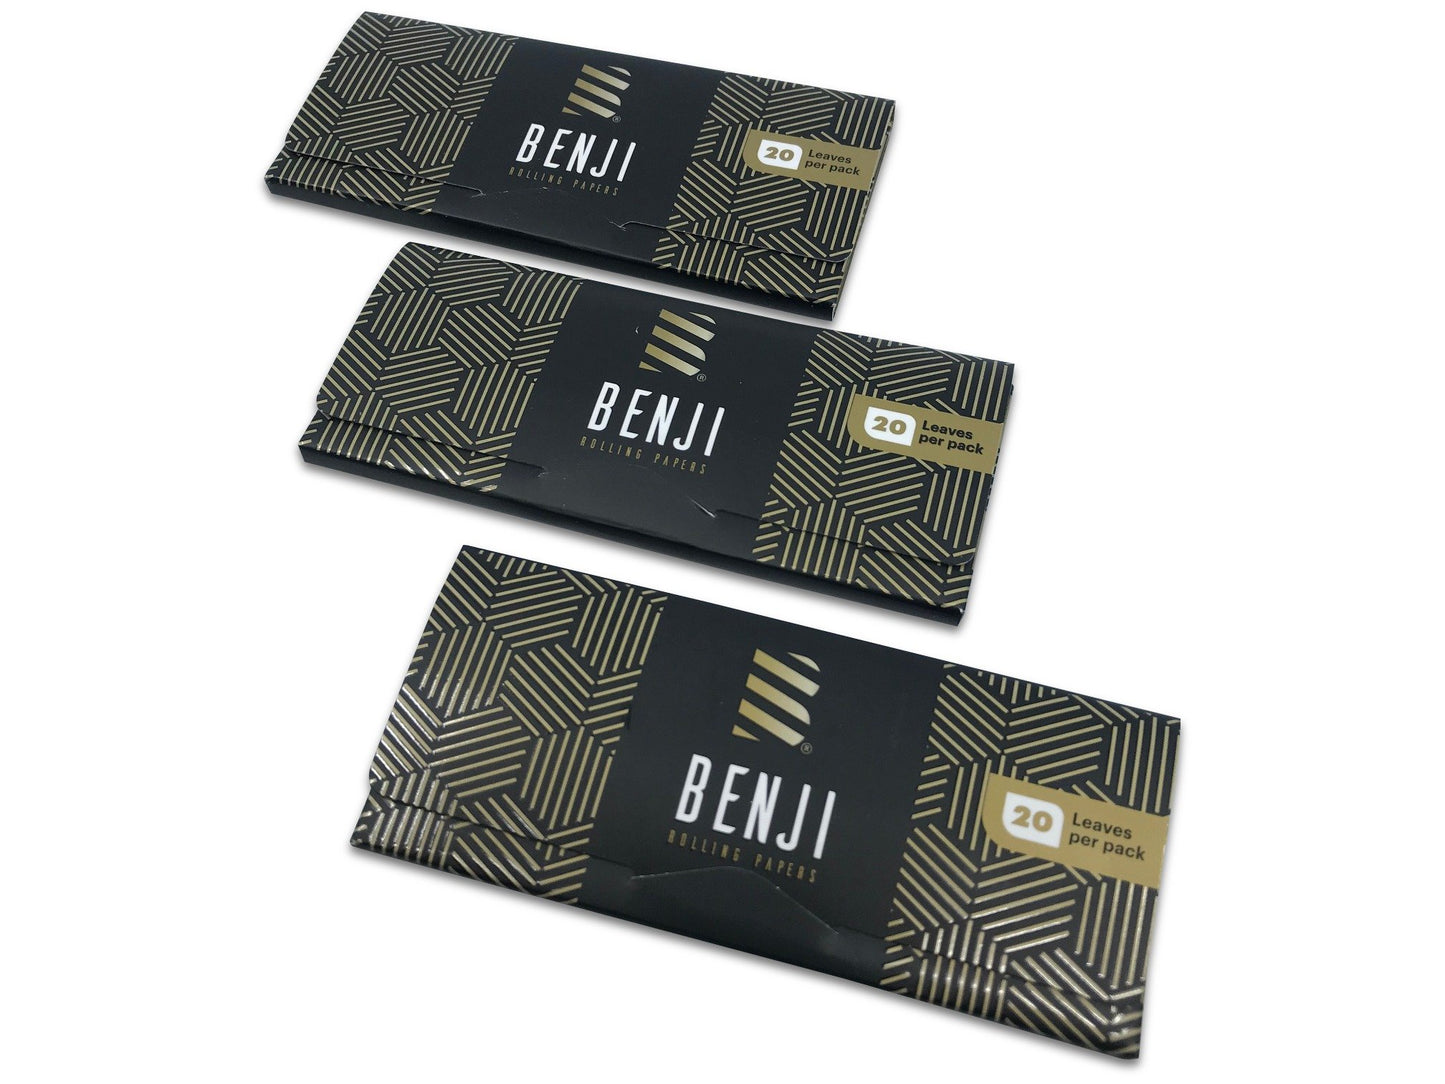 Benji - Rolling Paper Booklets (Box of 24)